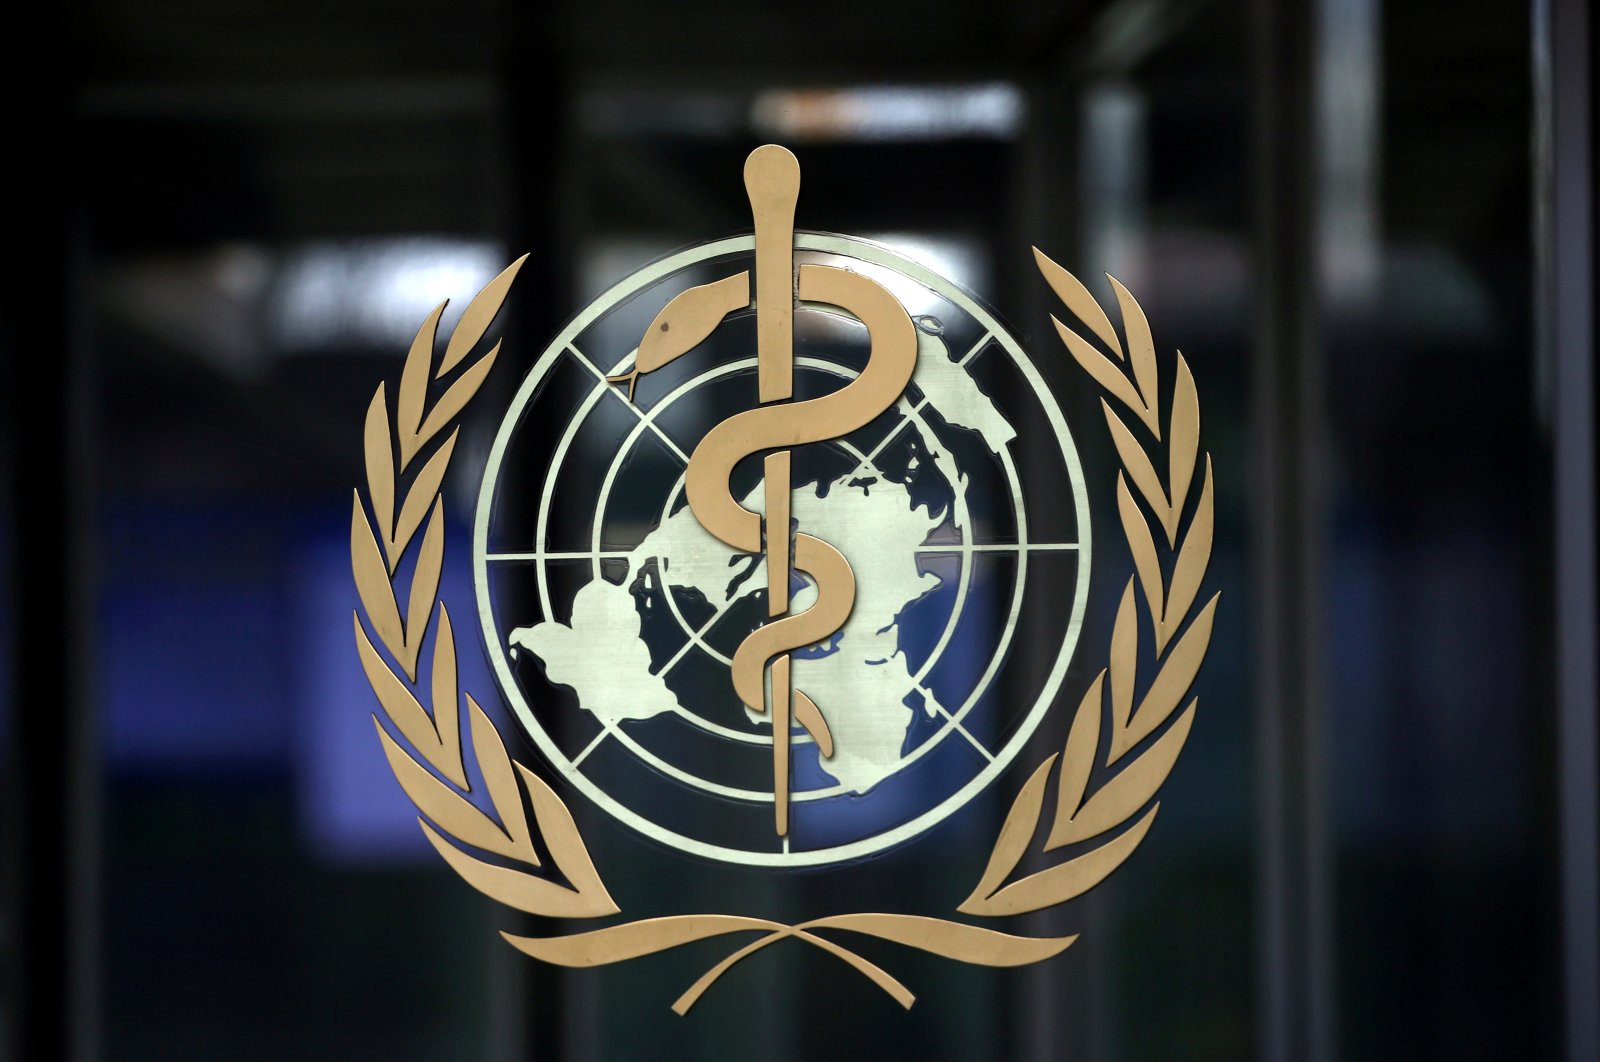 A logo is pictured on the headquarters of the World Health Organization (WHO) ahead of a meeting of the Emergency Committee on the novel coronavirus in Geneva, Switzerland, Jan. 30, 2020. (Reuters Photo)